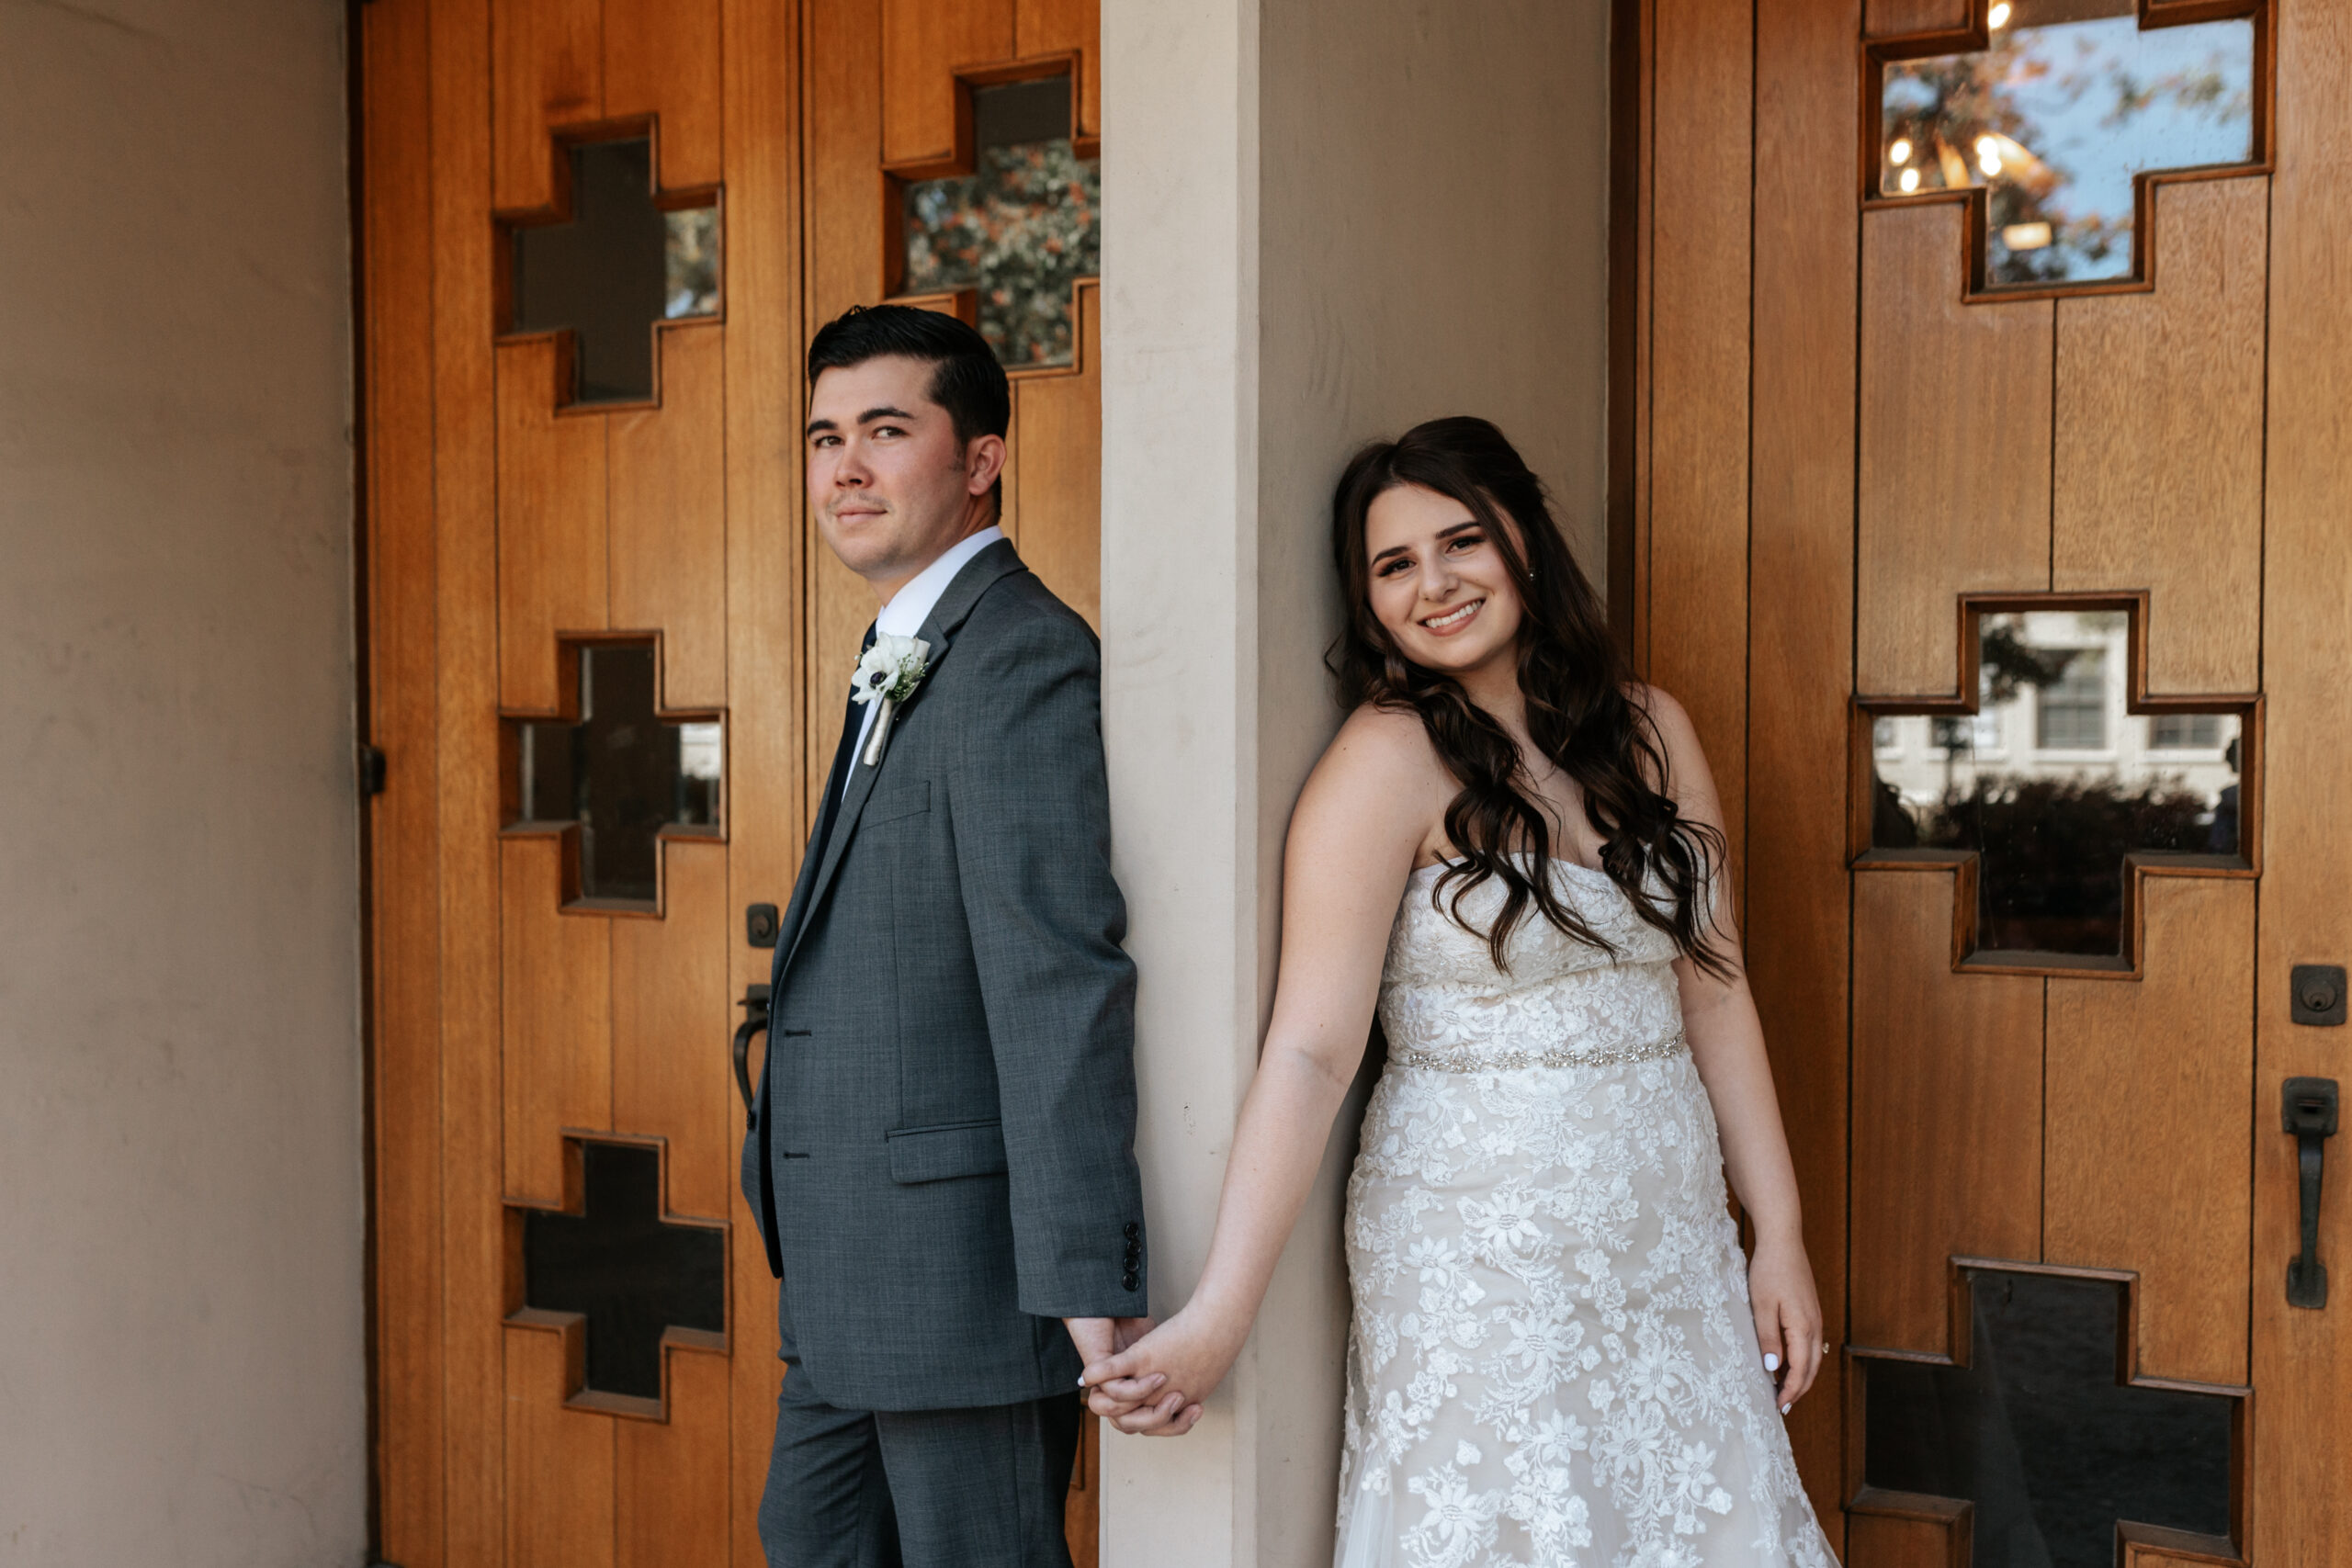 A bride and groom smiling at the camera, holding hands in front of the decorative doors of the Sanctuary.